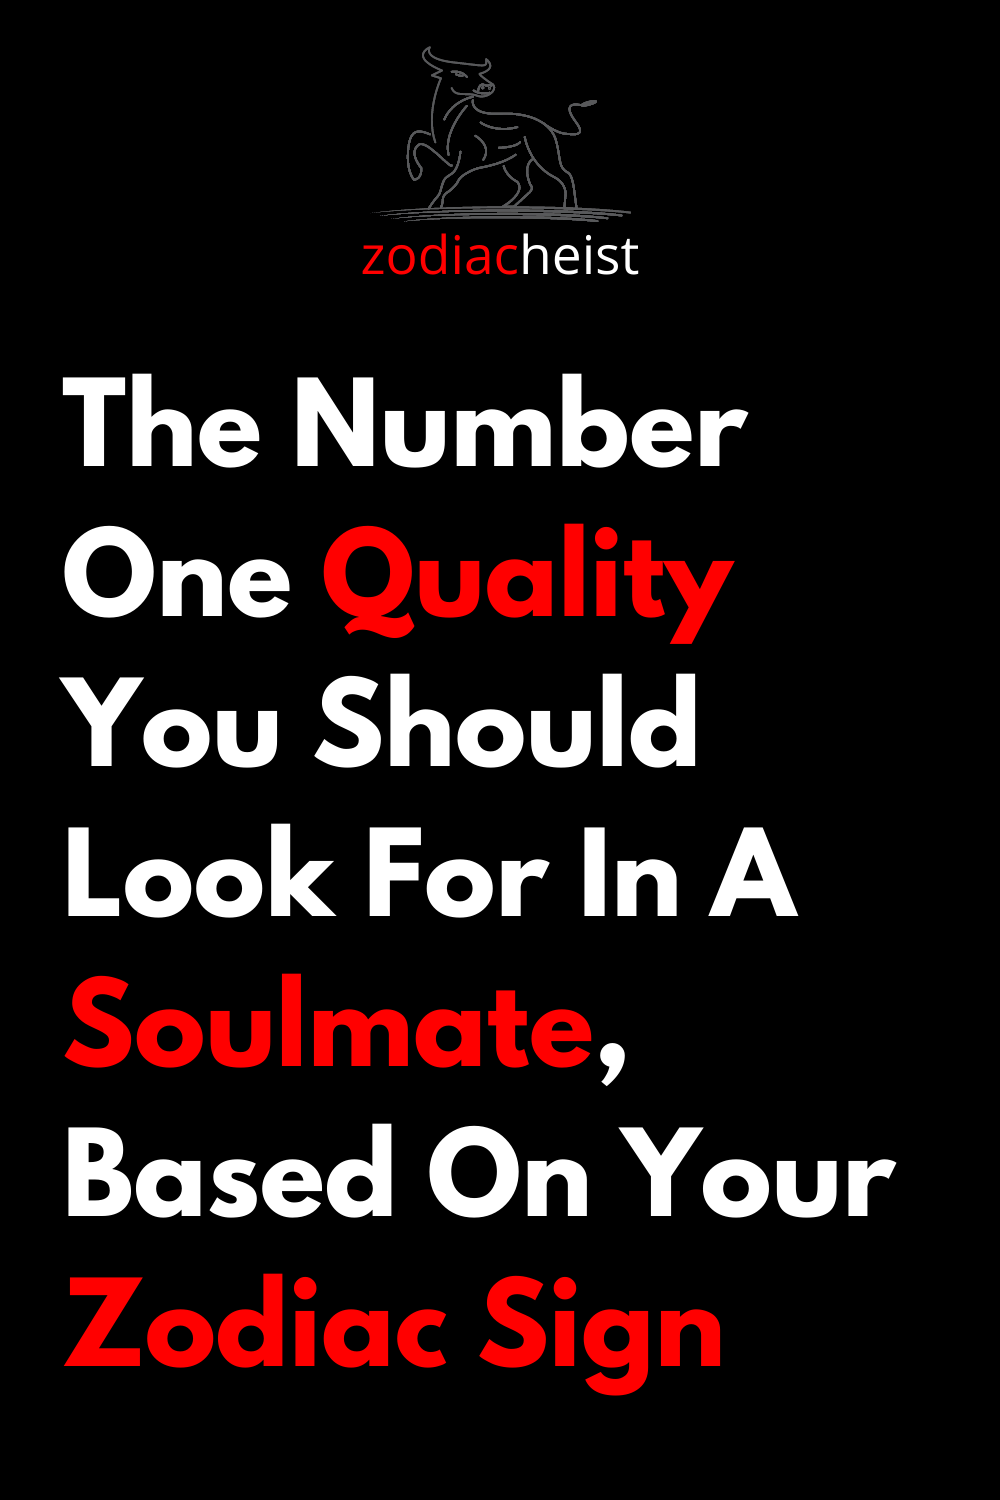 The Number One Quality You Should Look For In A Soulmate, Based On Your Zodiac Sign